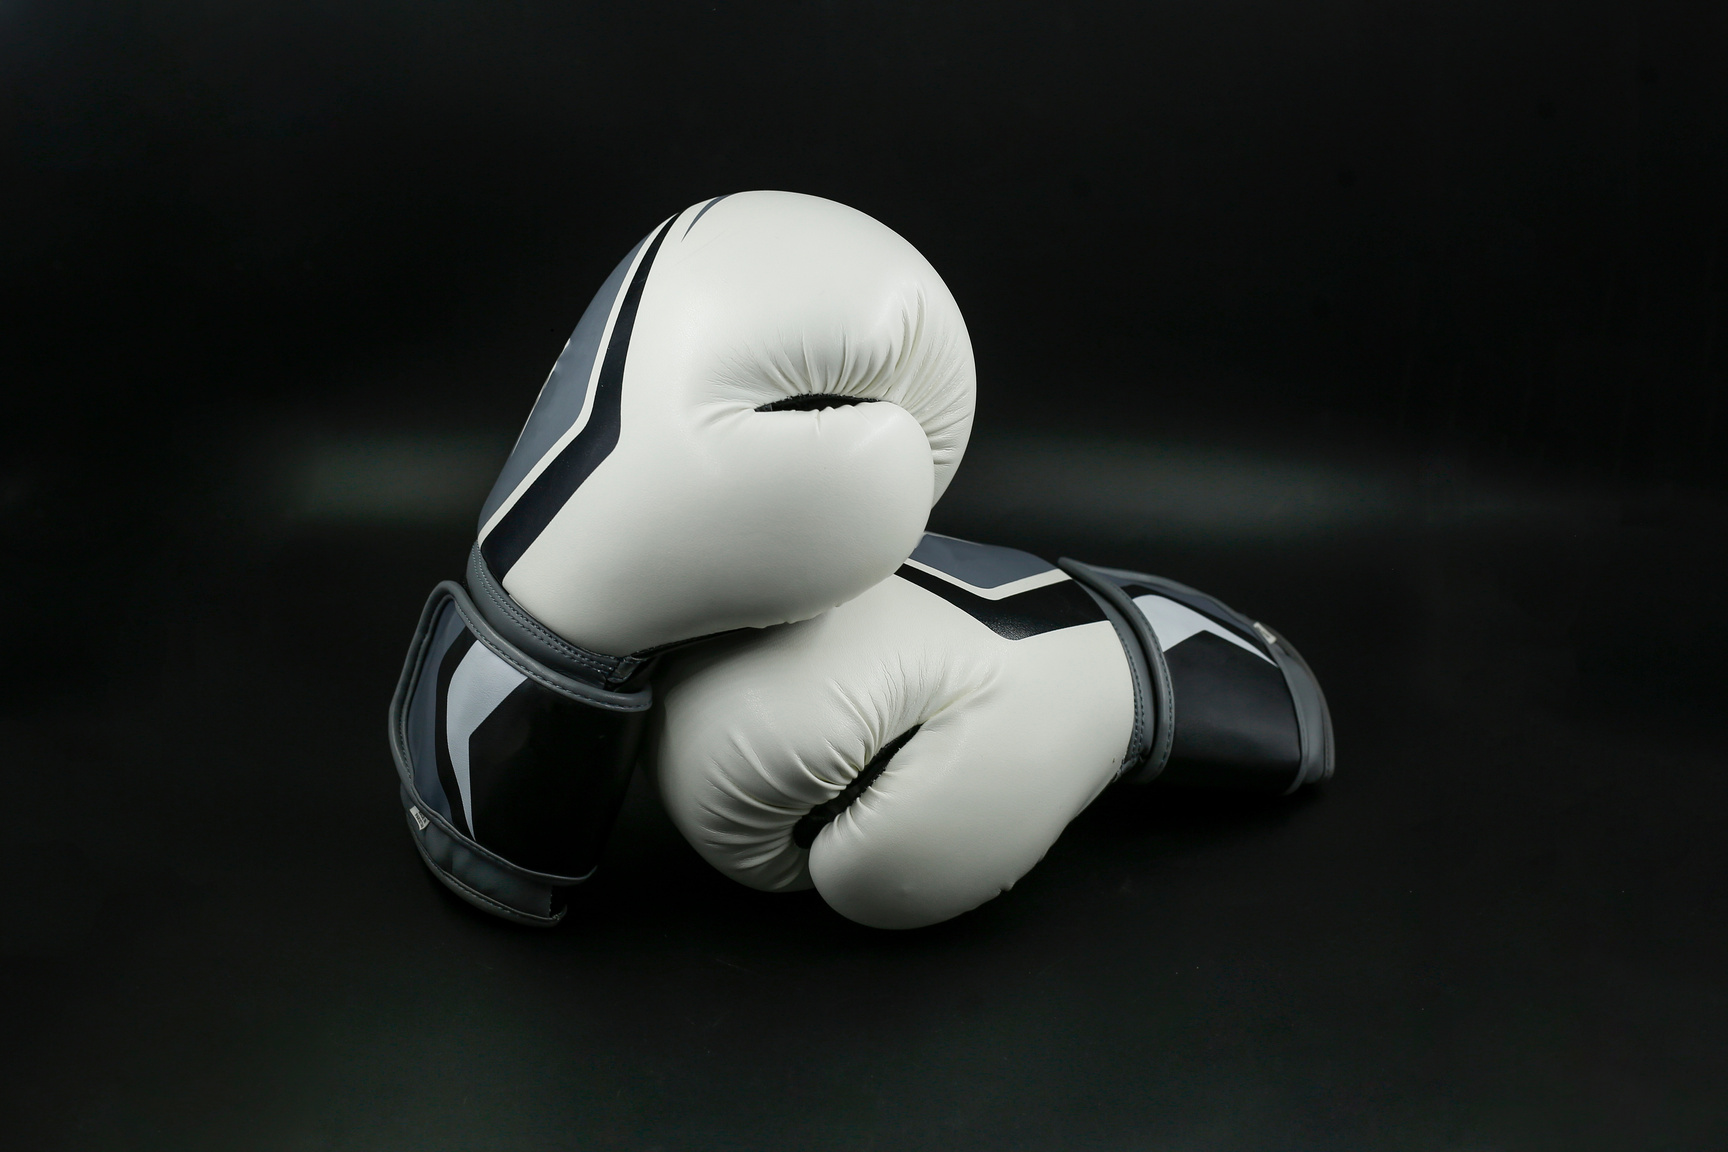 Black and White Photo of Boxing Gloves